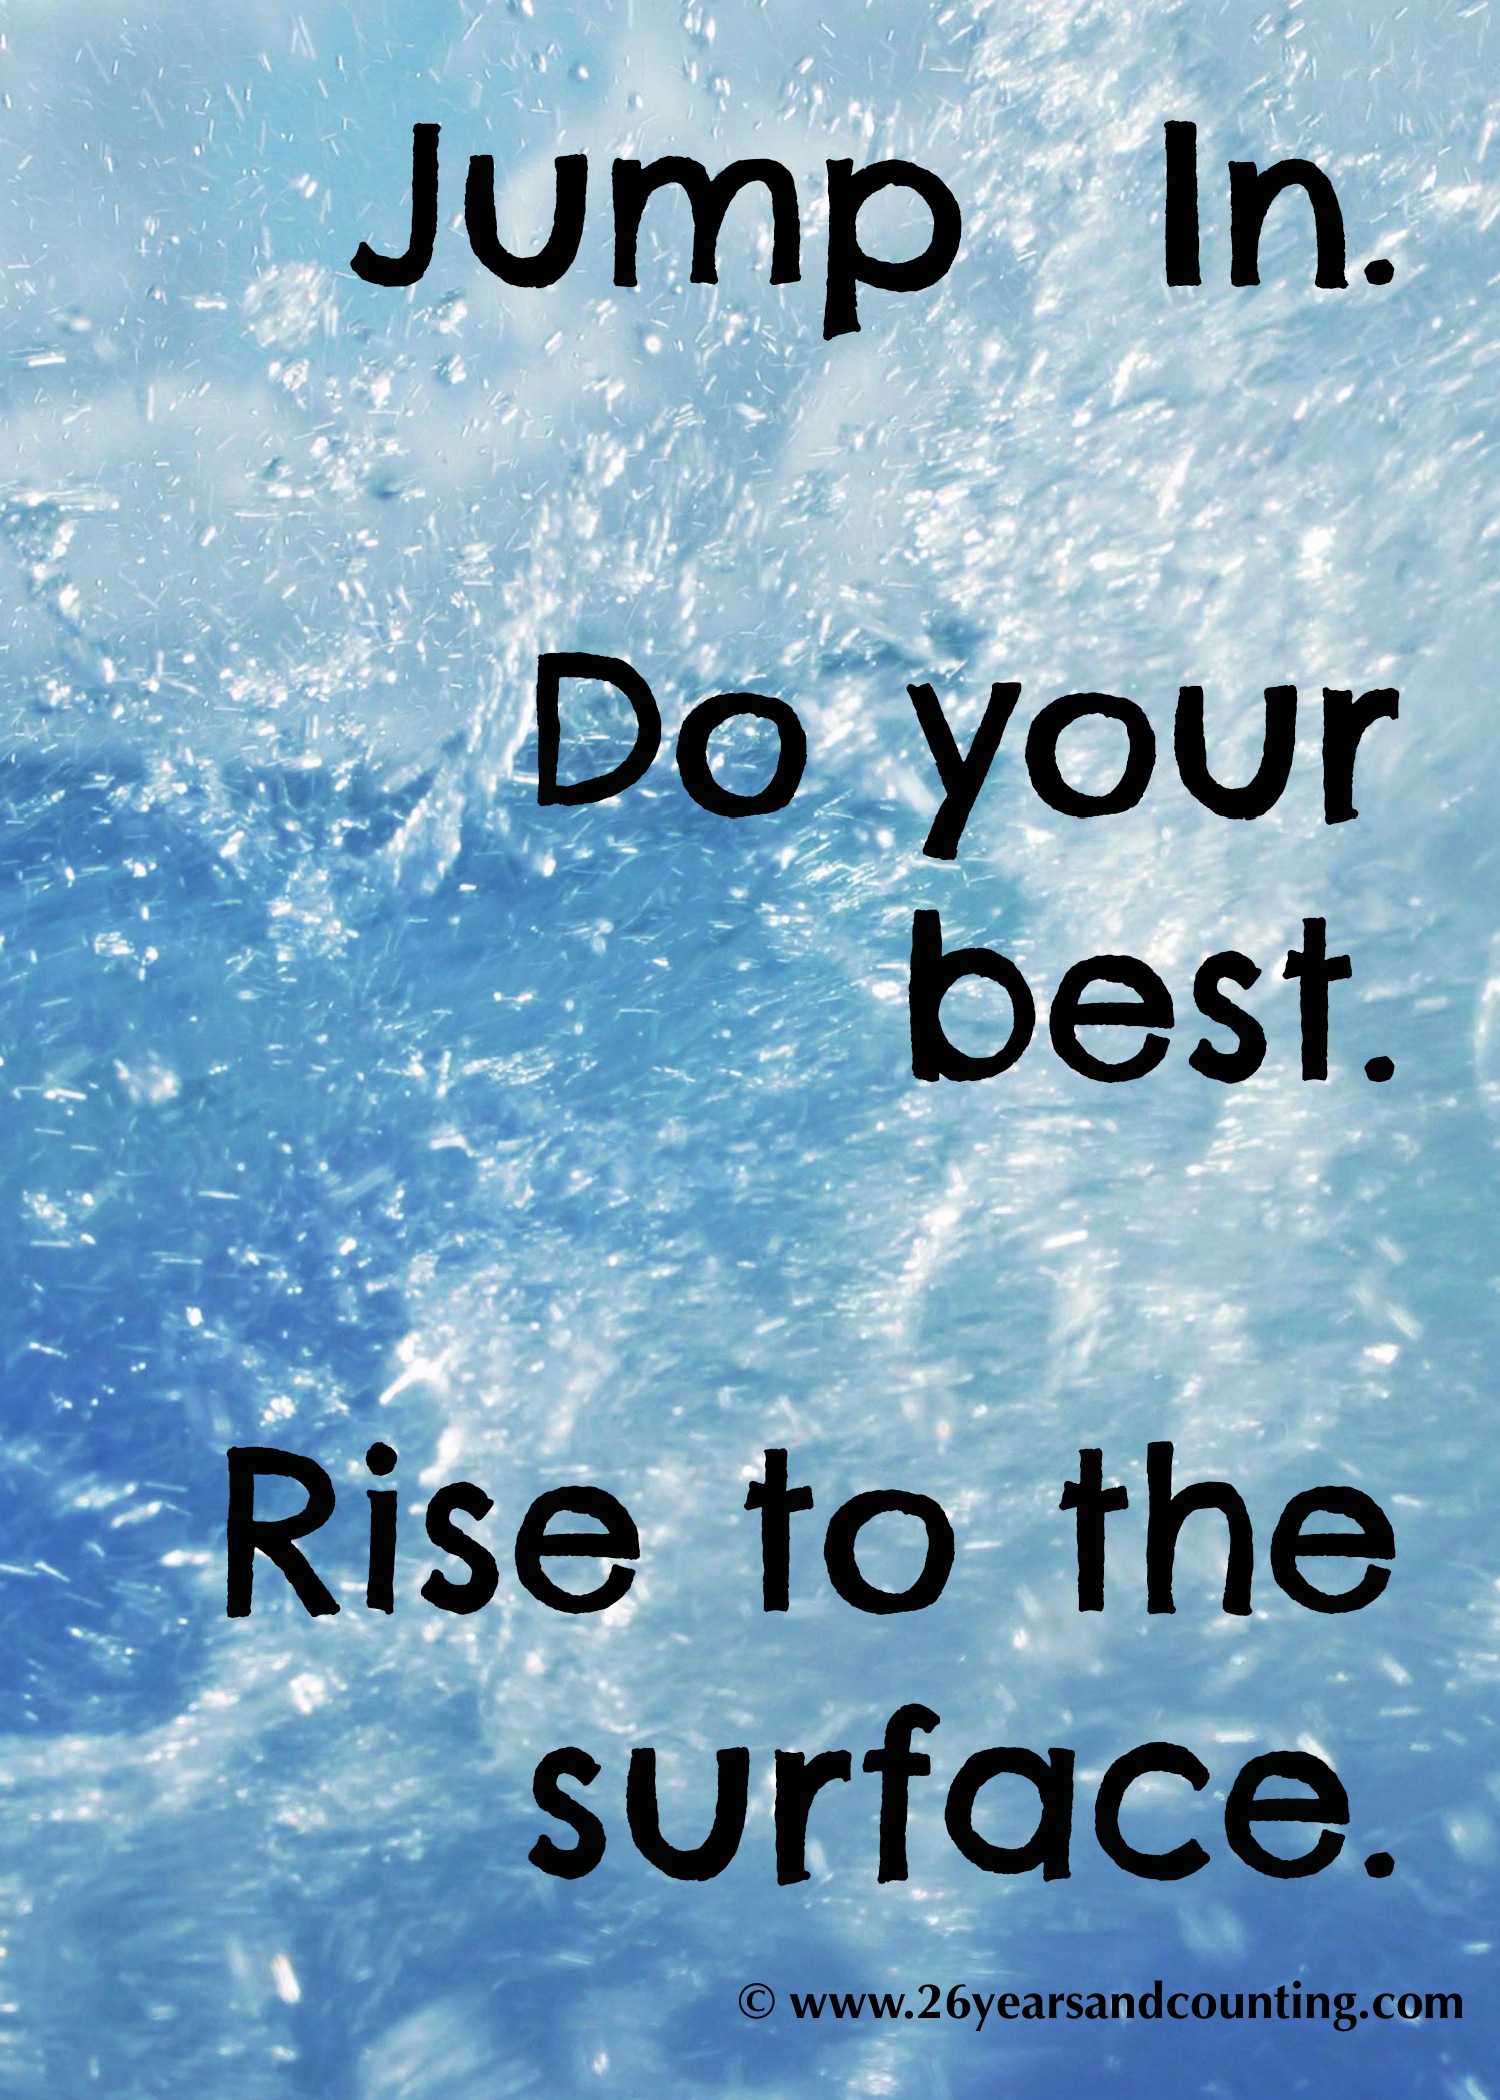 Jump In. Do your best. Rise to the Surface.